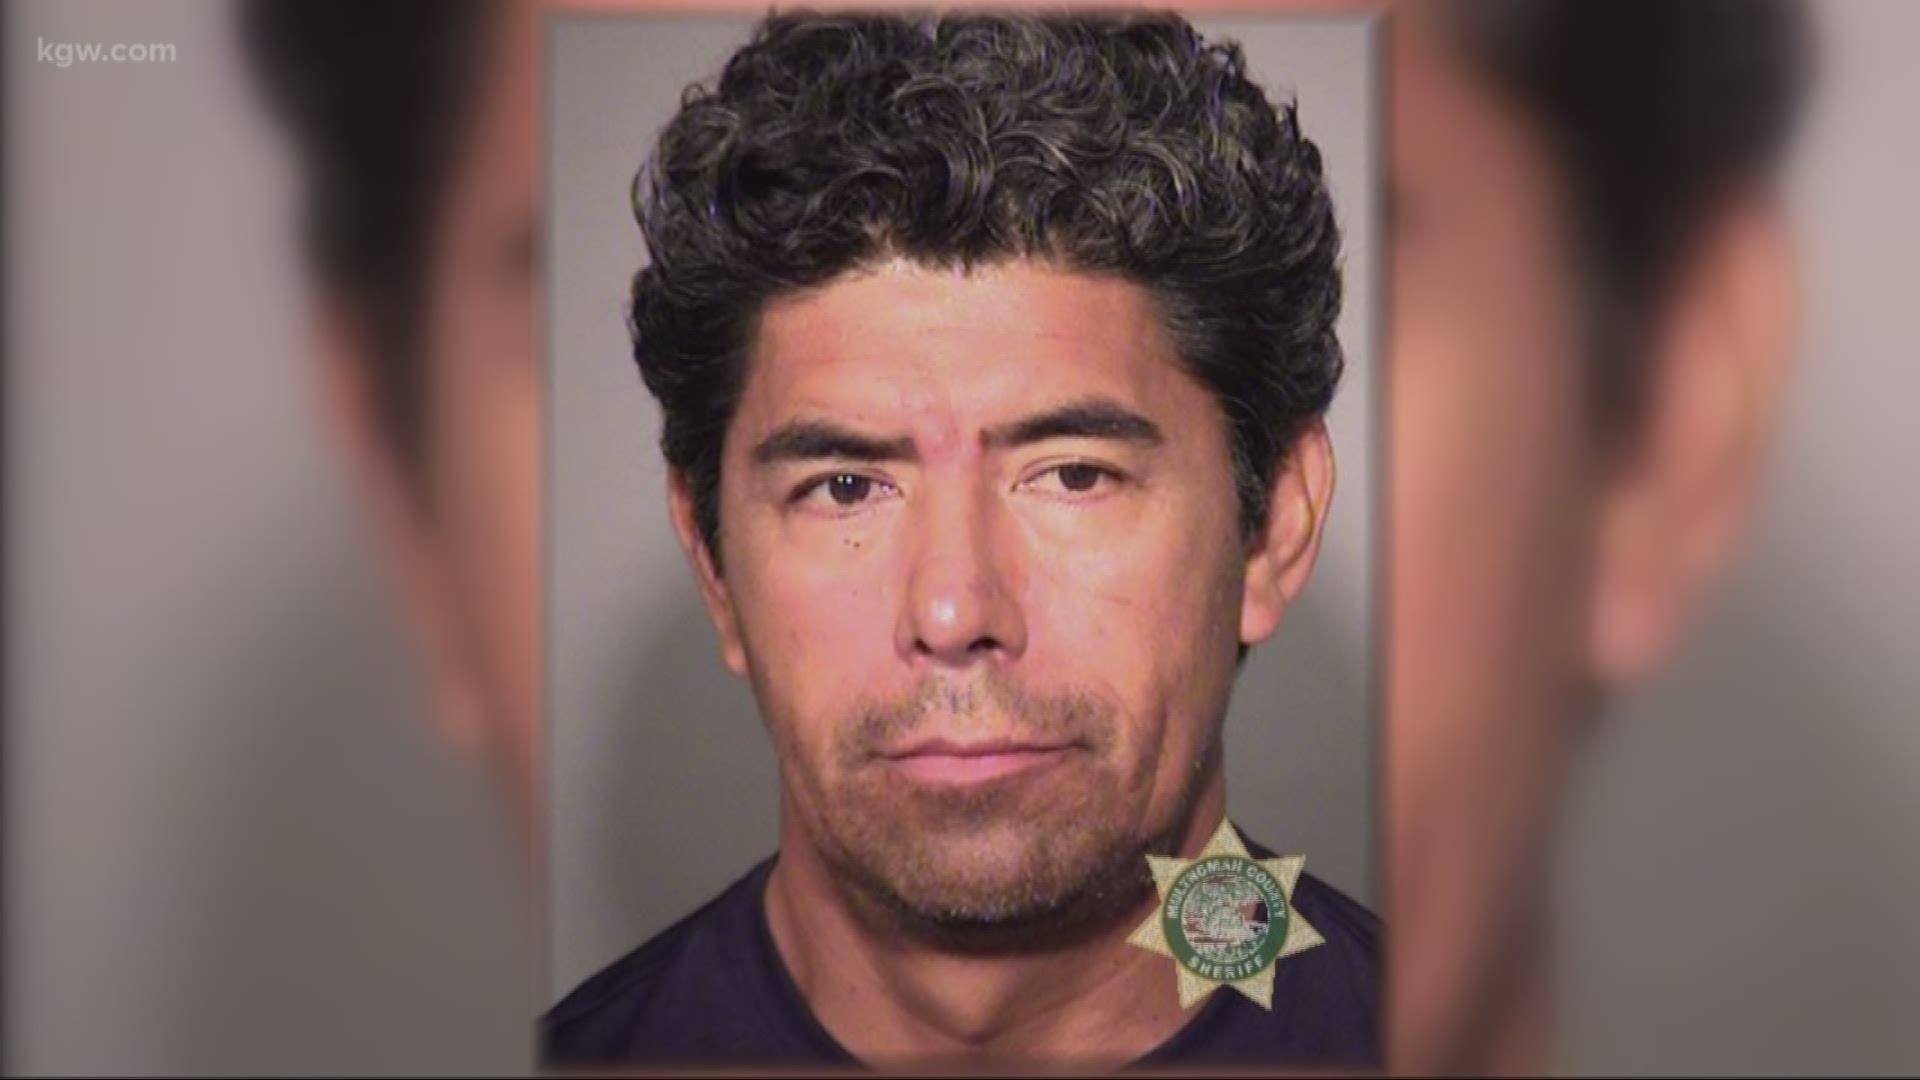 Ricardo Sanchez-Garcia faces two counts of first-degree sex abuse.